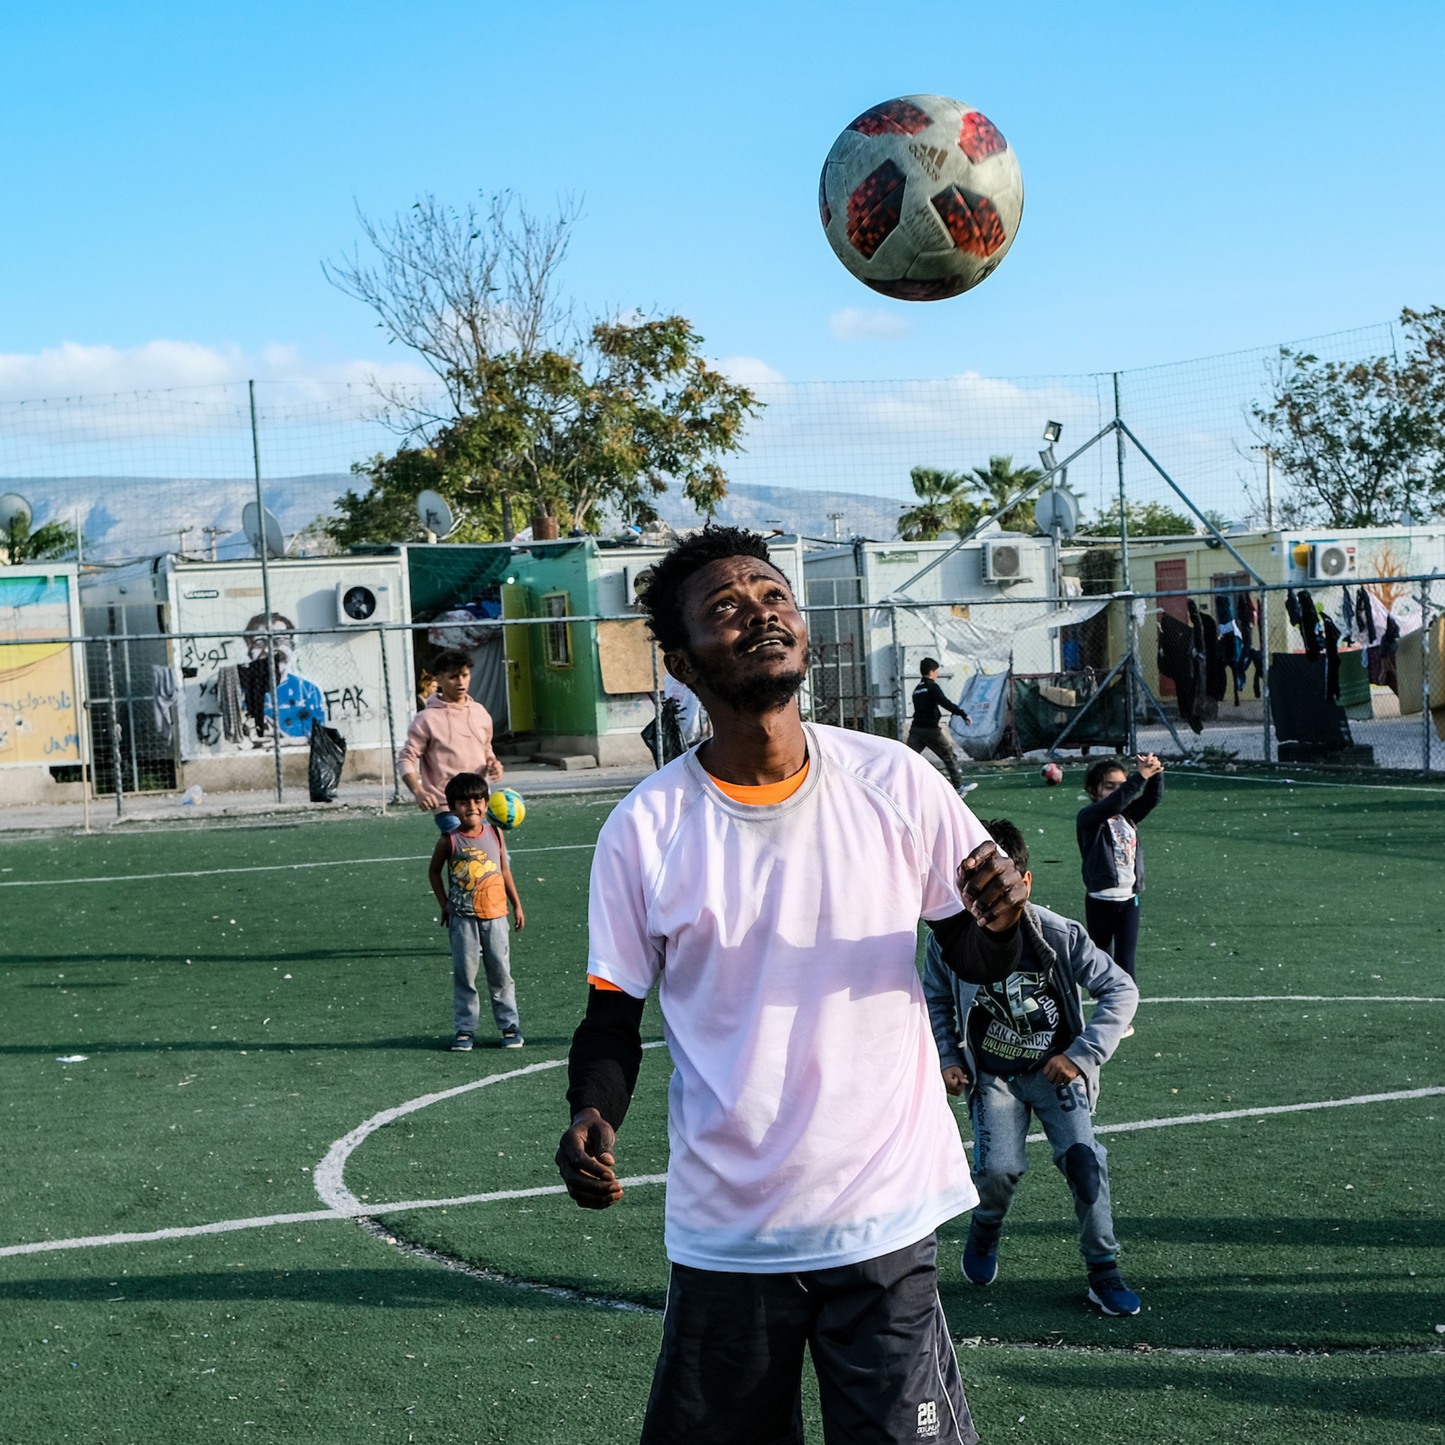 An image with a refugee man playing with a football on a pitch. Behind him there are 4 boys looking at him. In the background there is a refugee camp with improvised accommodation.